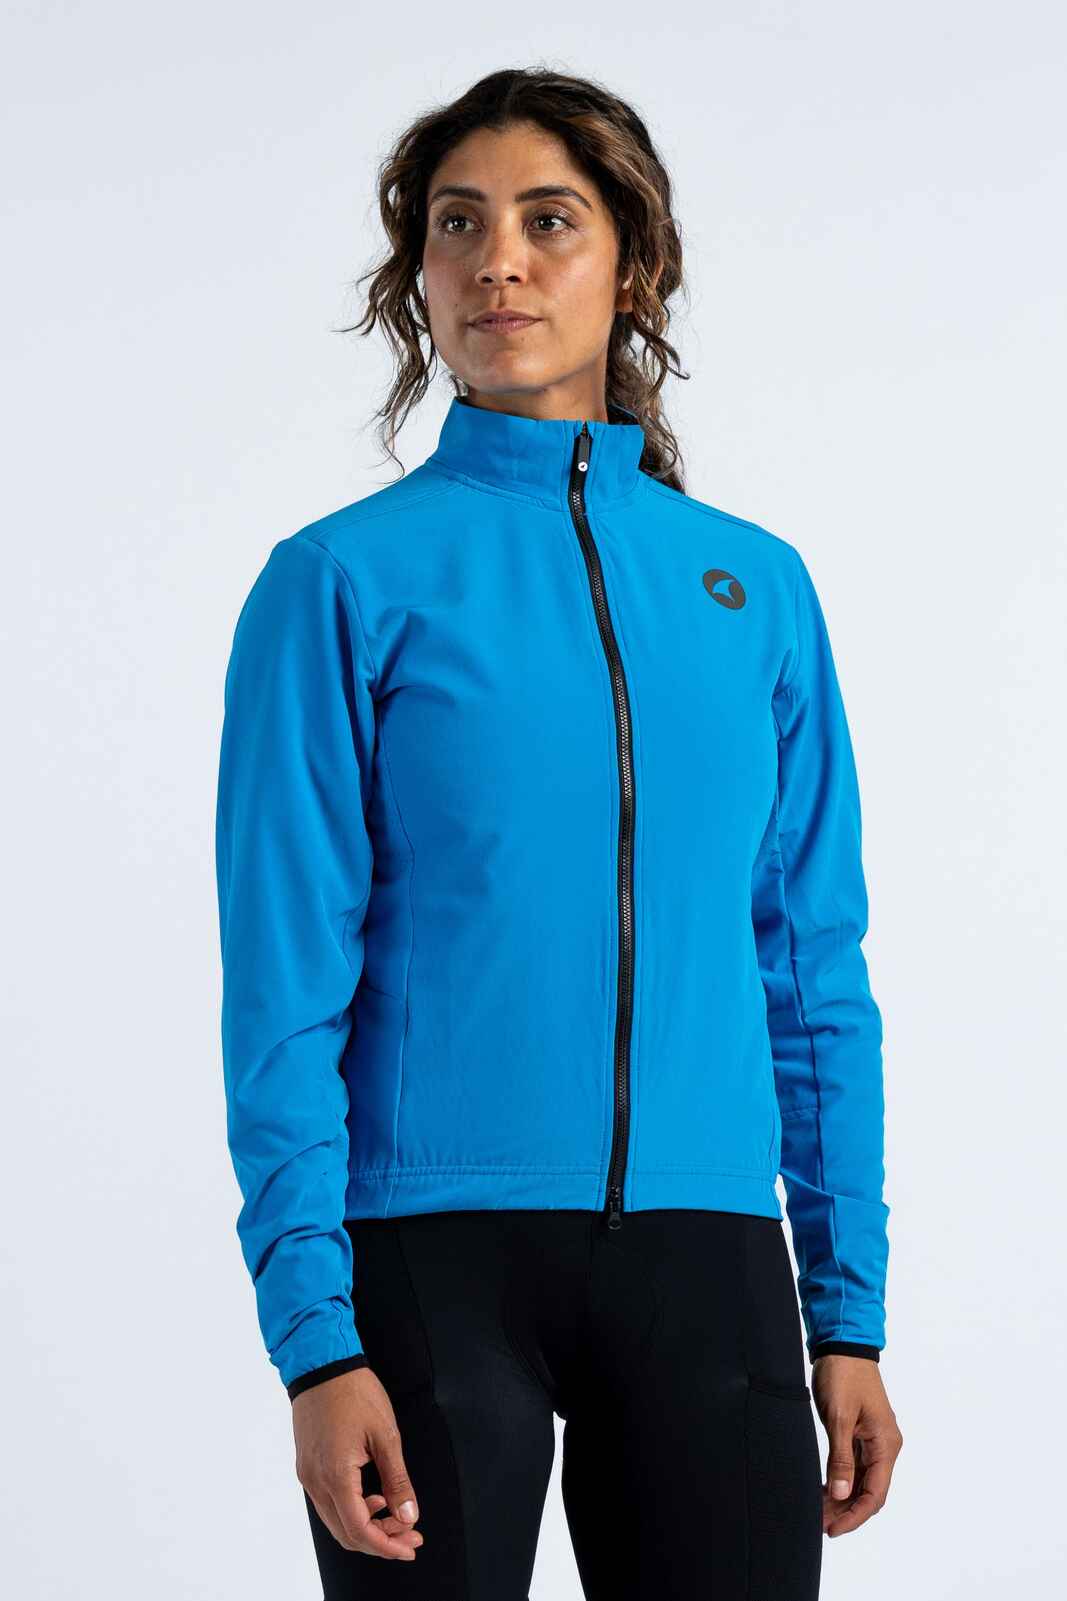 Women's Blue Winter Cycling Jacket - Alpine Front View